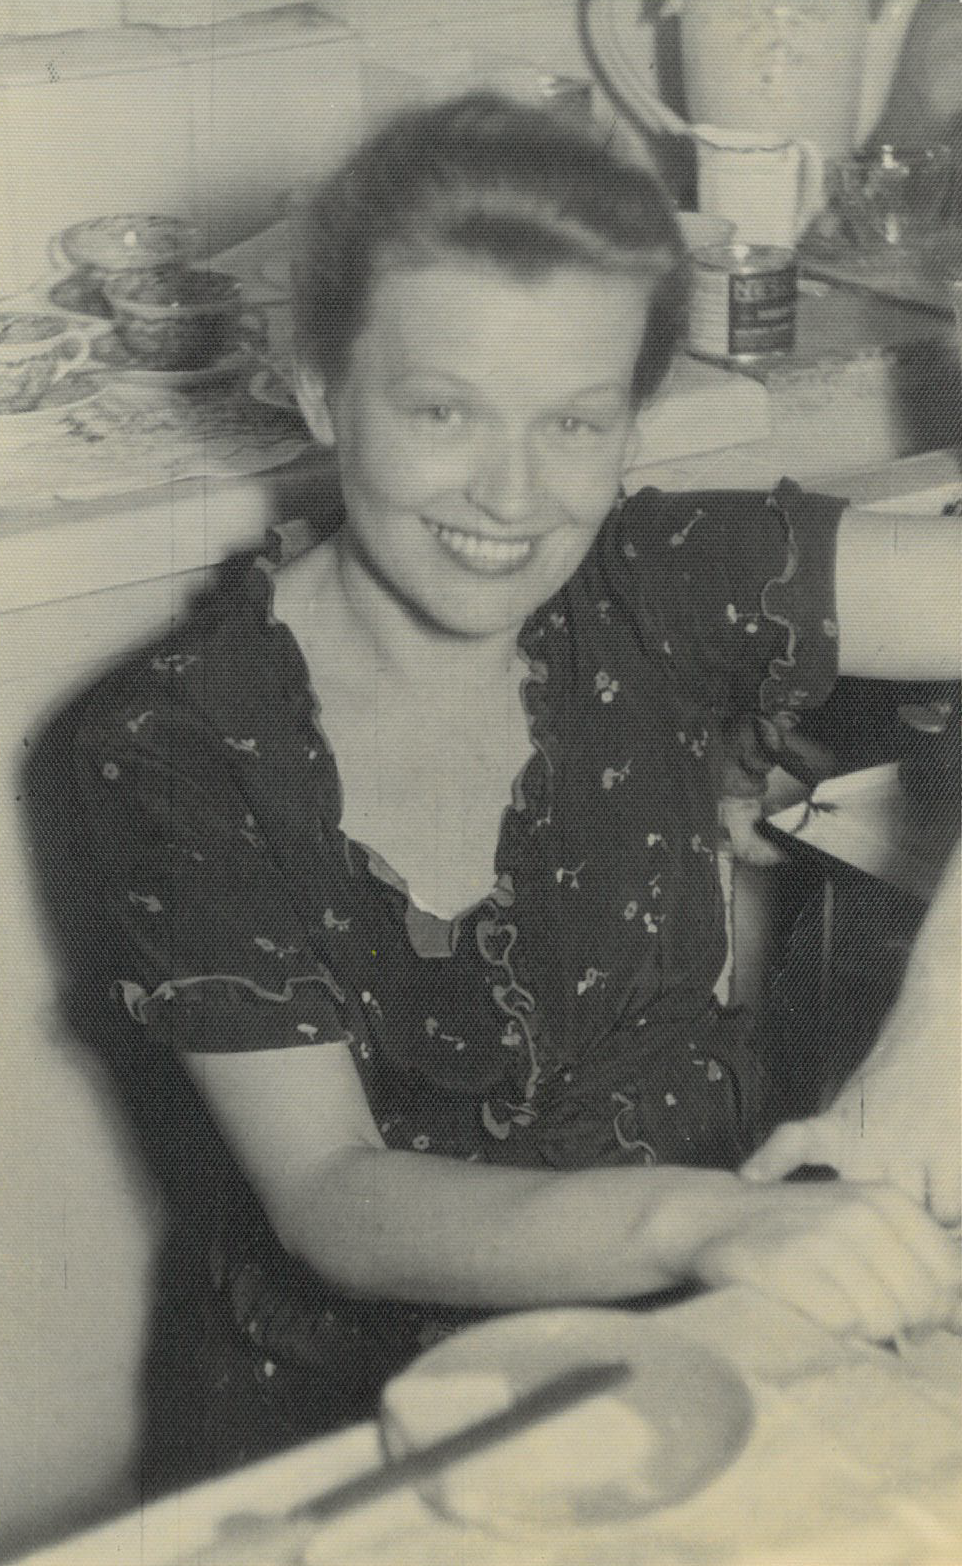 A photo of Galina Sugowdz sitting at the table and looking to the camera